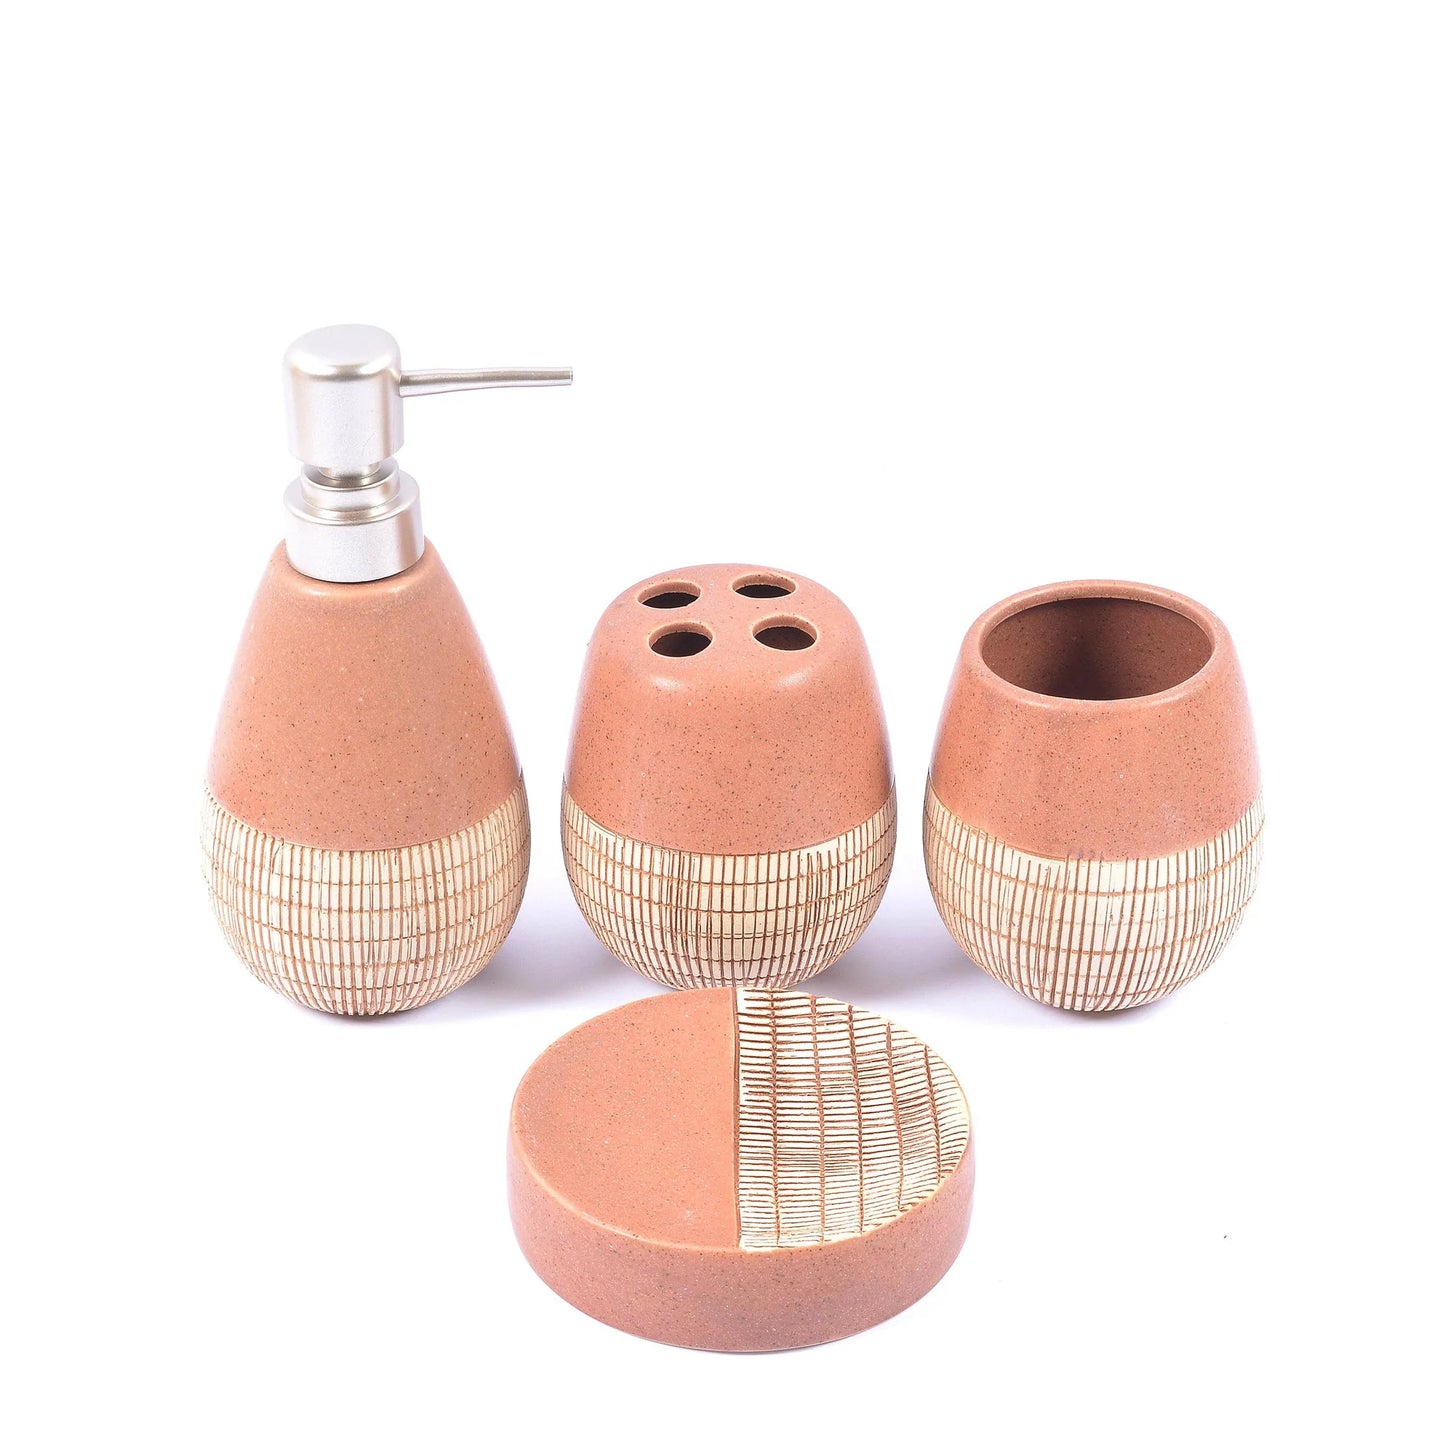 Textured Bath Set - Available In 2 Colors